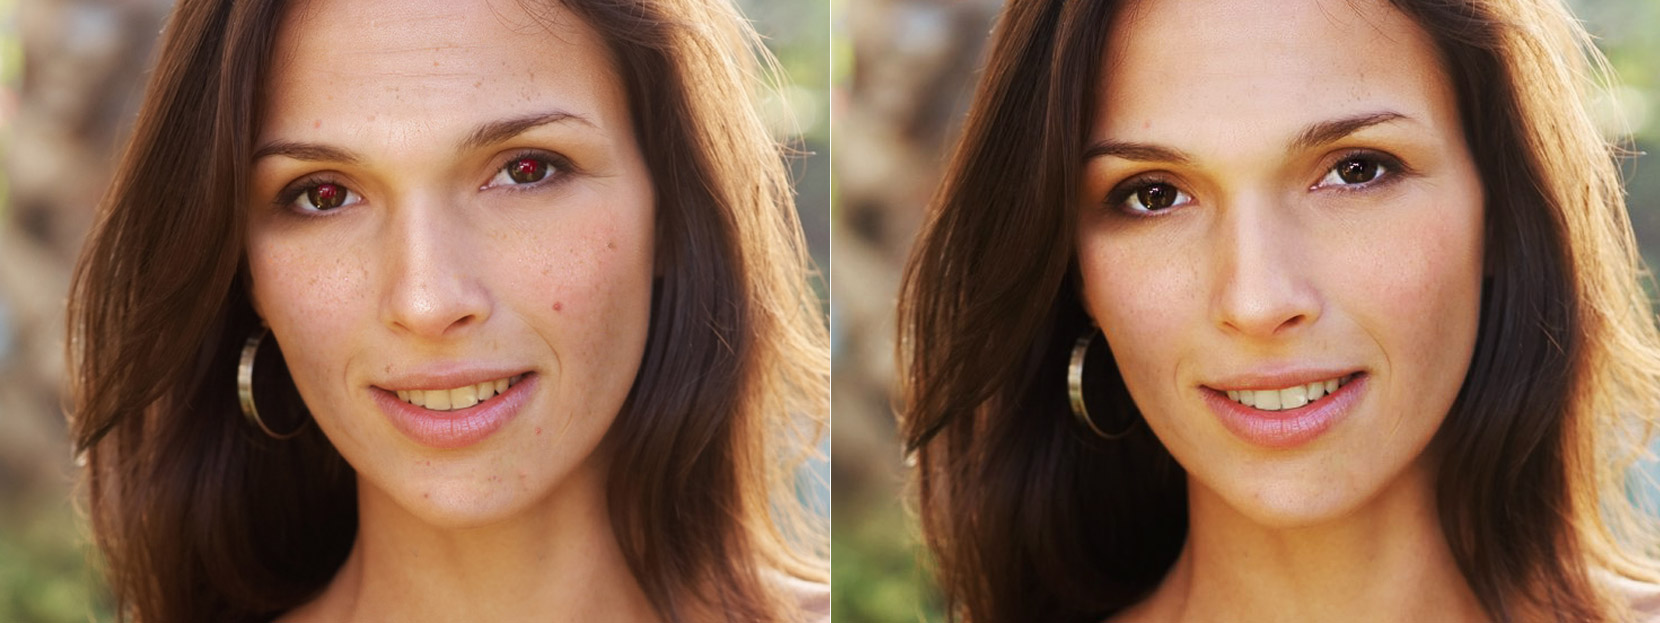 Before and after face retouch on Makeup.Pho.to